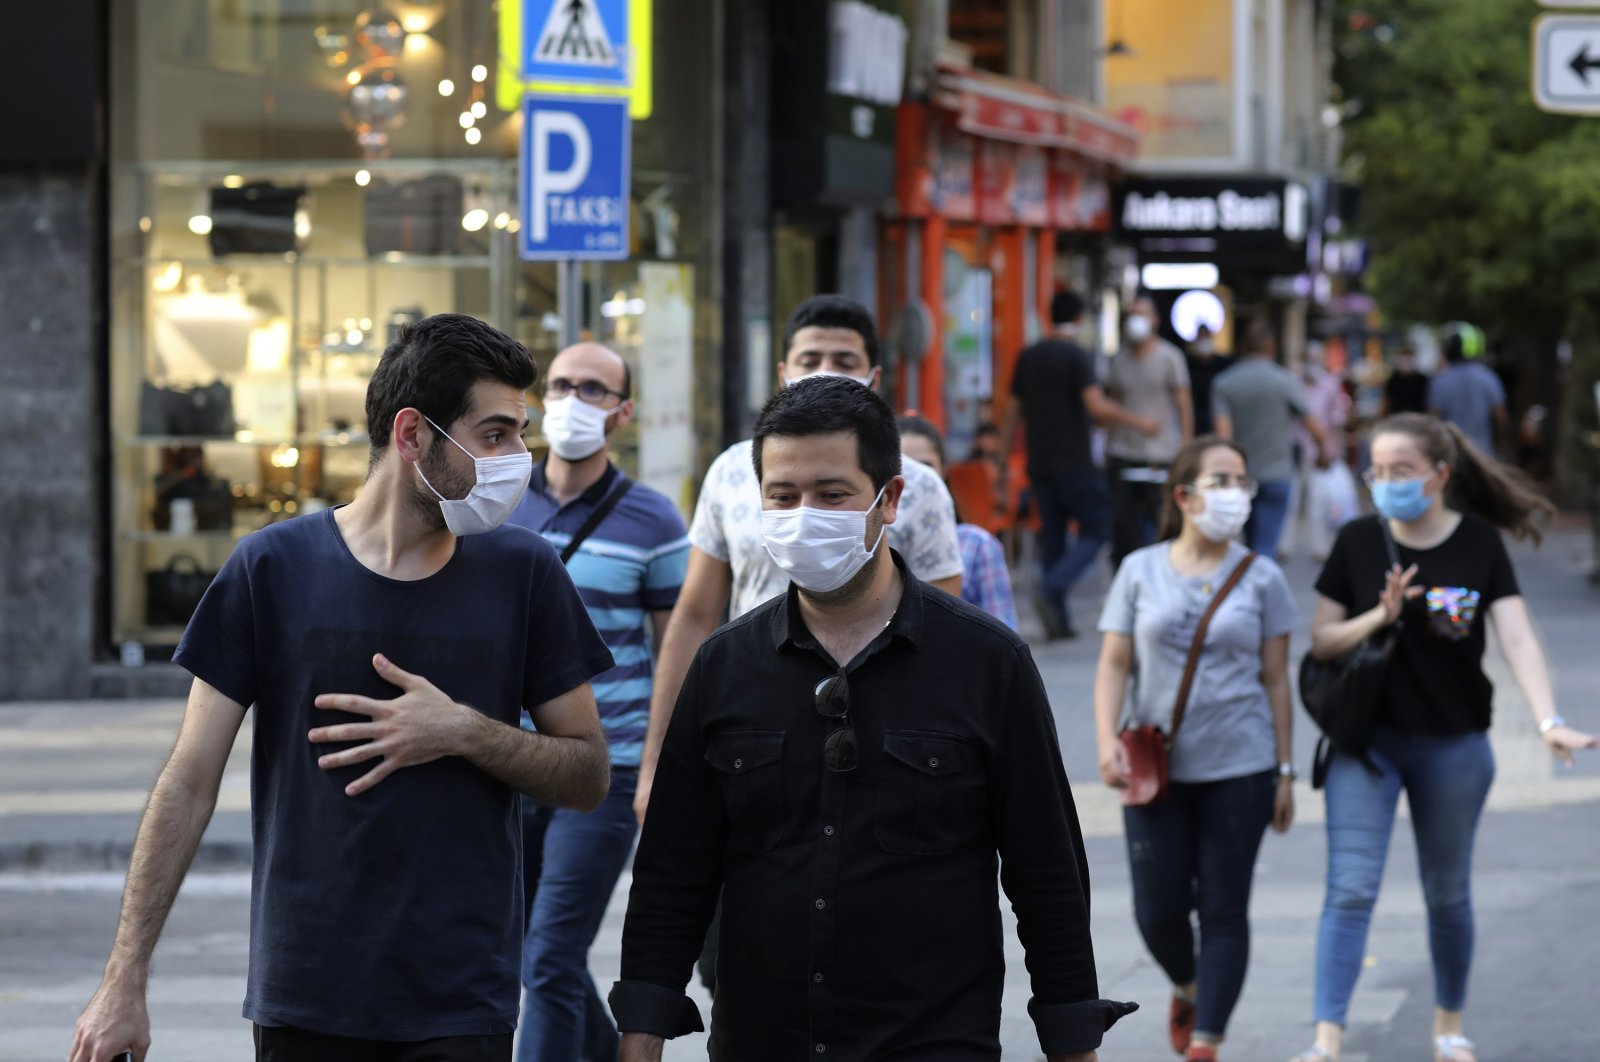 People wearing face masks to protect against the spread of coronavirus, walk in Ankara, Turkey, Thursday, Aug. 6, 2020. Turkey's interior ministry announced new measures Wednesday to curb the spread of COVID-19 as daily confirmed cases peaked above 1,000. (AP Photo)